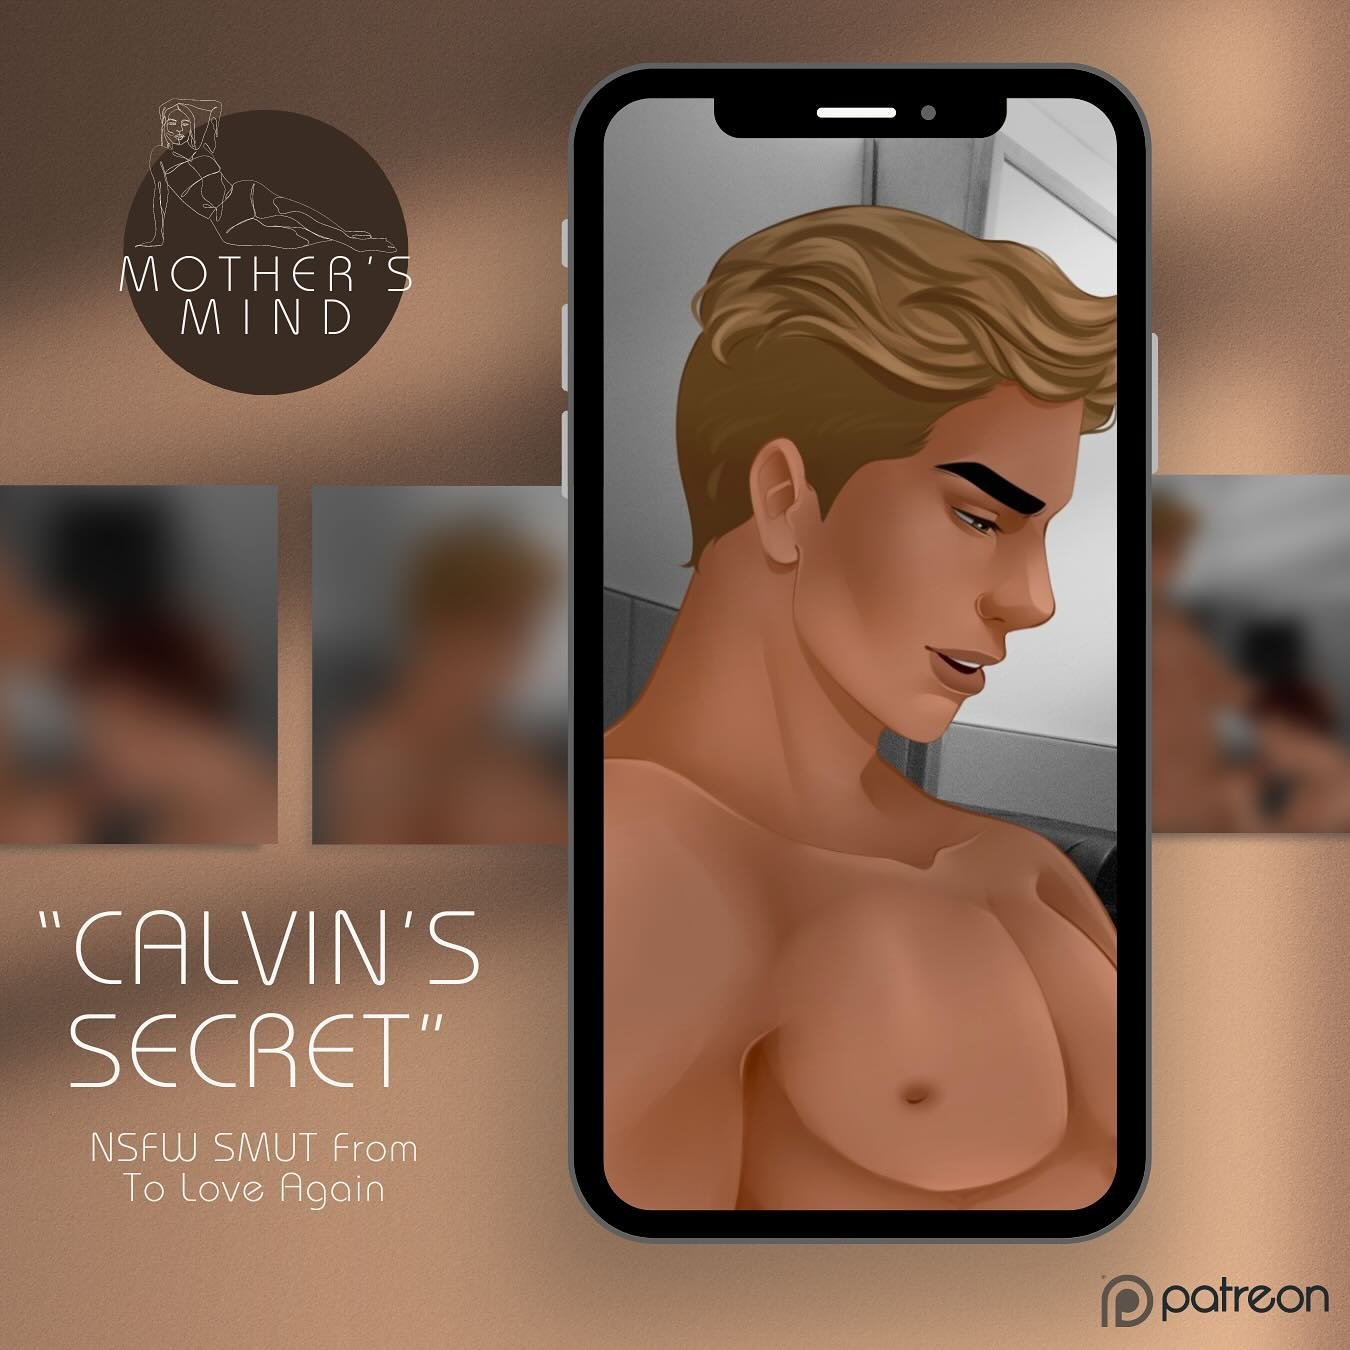 &ldquo;CALVIN&rsquo;S SECRET&rdquo; - NSFW art and SMUT out now on MOTHER&rsquo;S MIND!